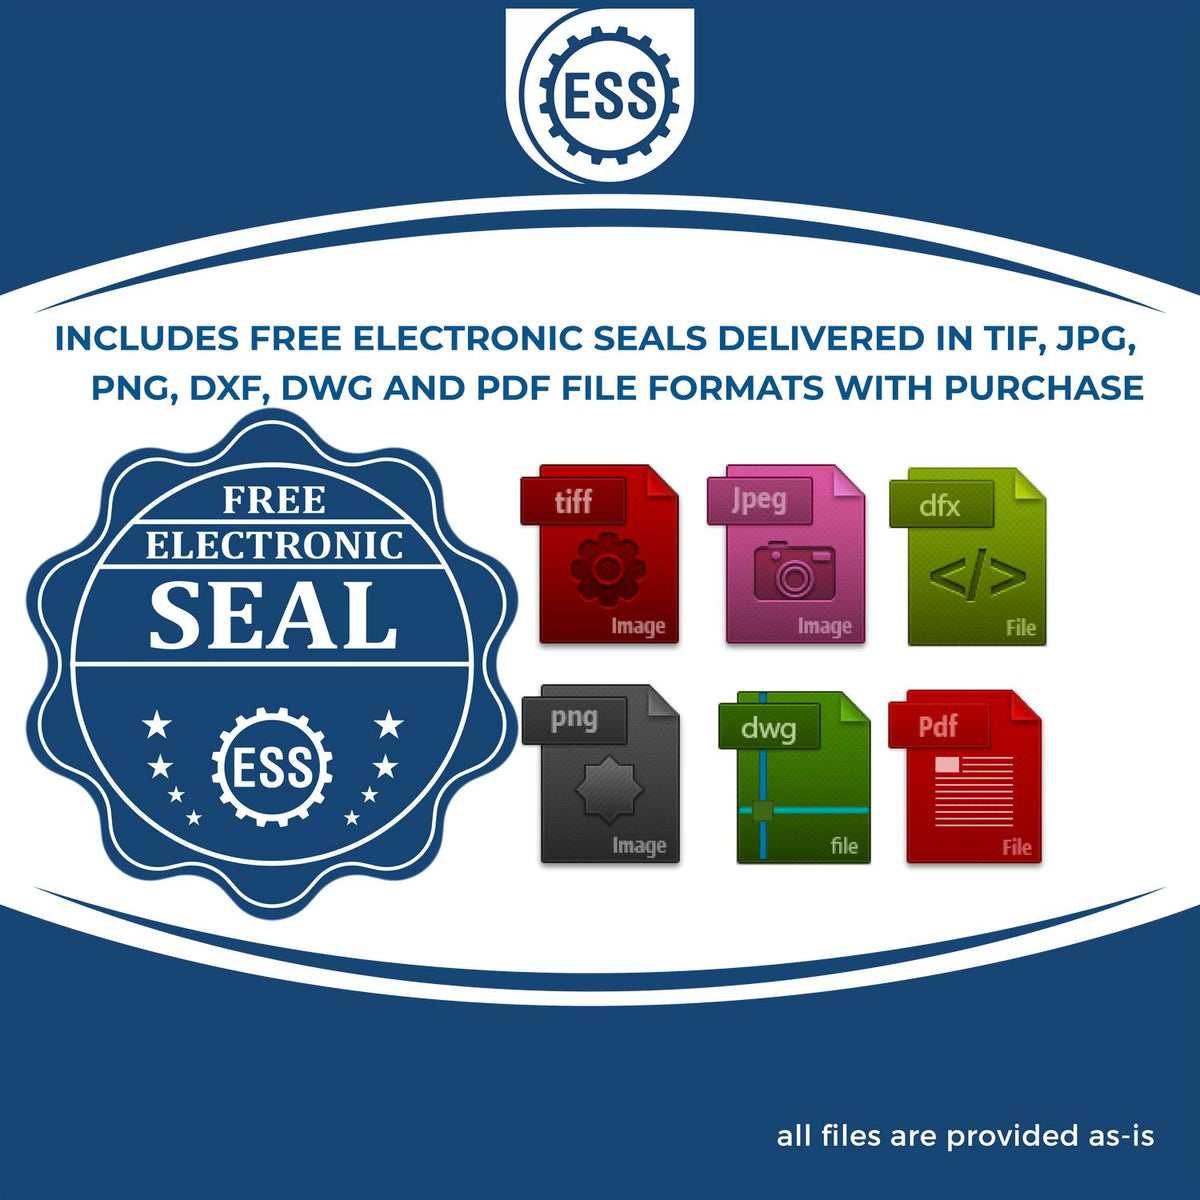 An infographic for the free electronic seal for the Slim Pre-Inked Kentucky Land Surveyor Seal Stamp illustrating the different file type icons such as DXF, DWG, TIF, JPG and PNG.